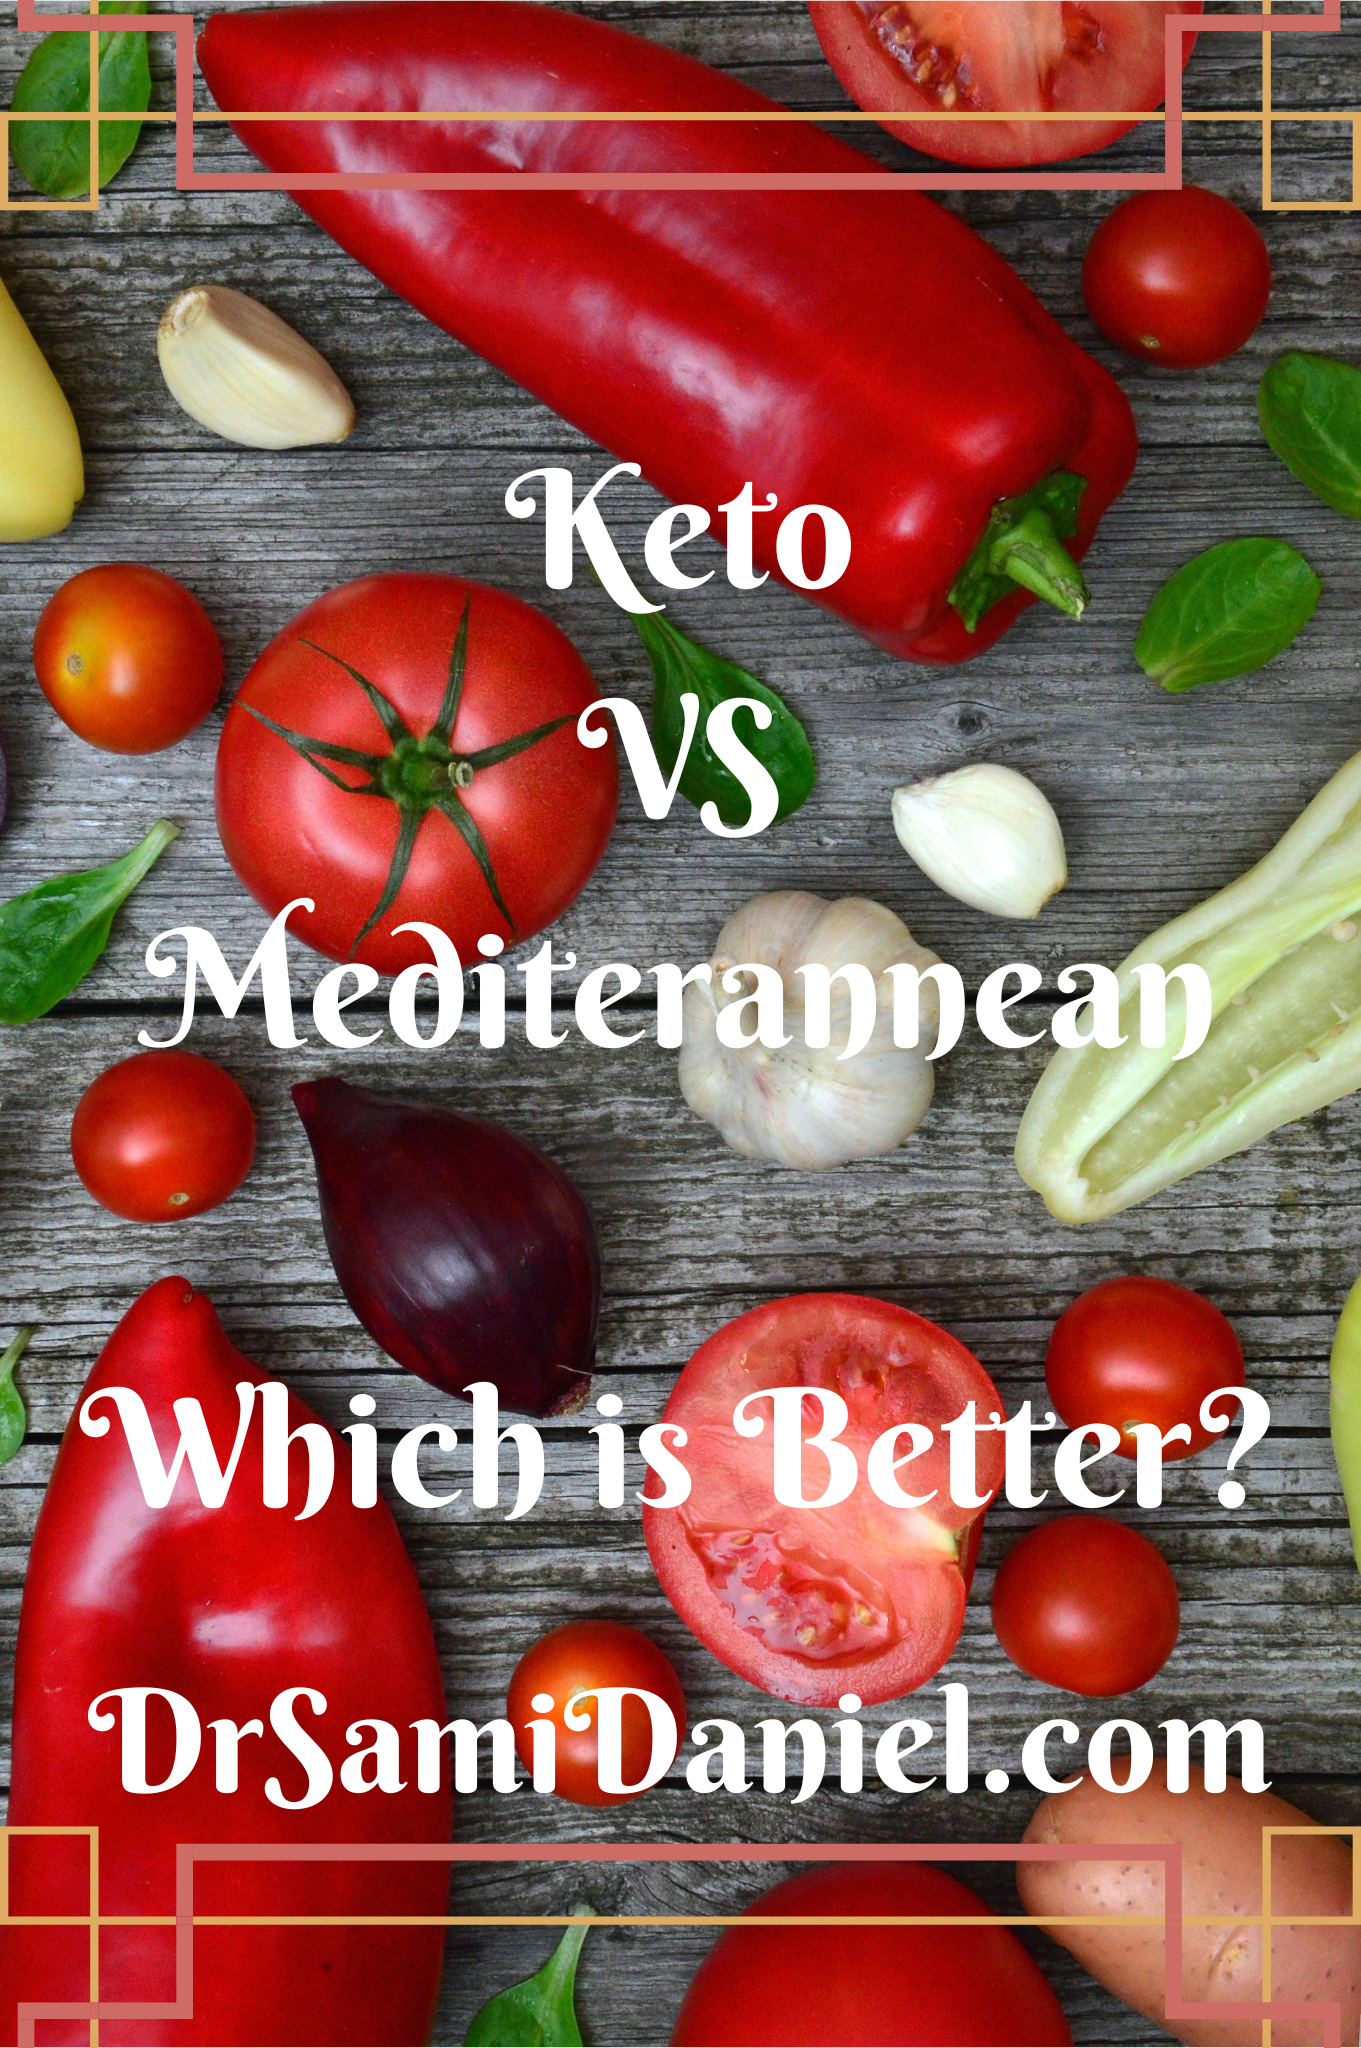 Keto versus Mediterranean diet. Have you ever wondered which one is better? Find out the results and what it means for you.